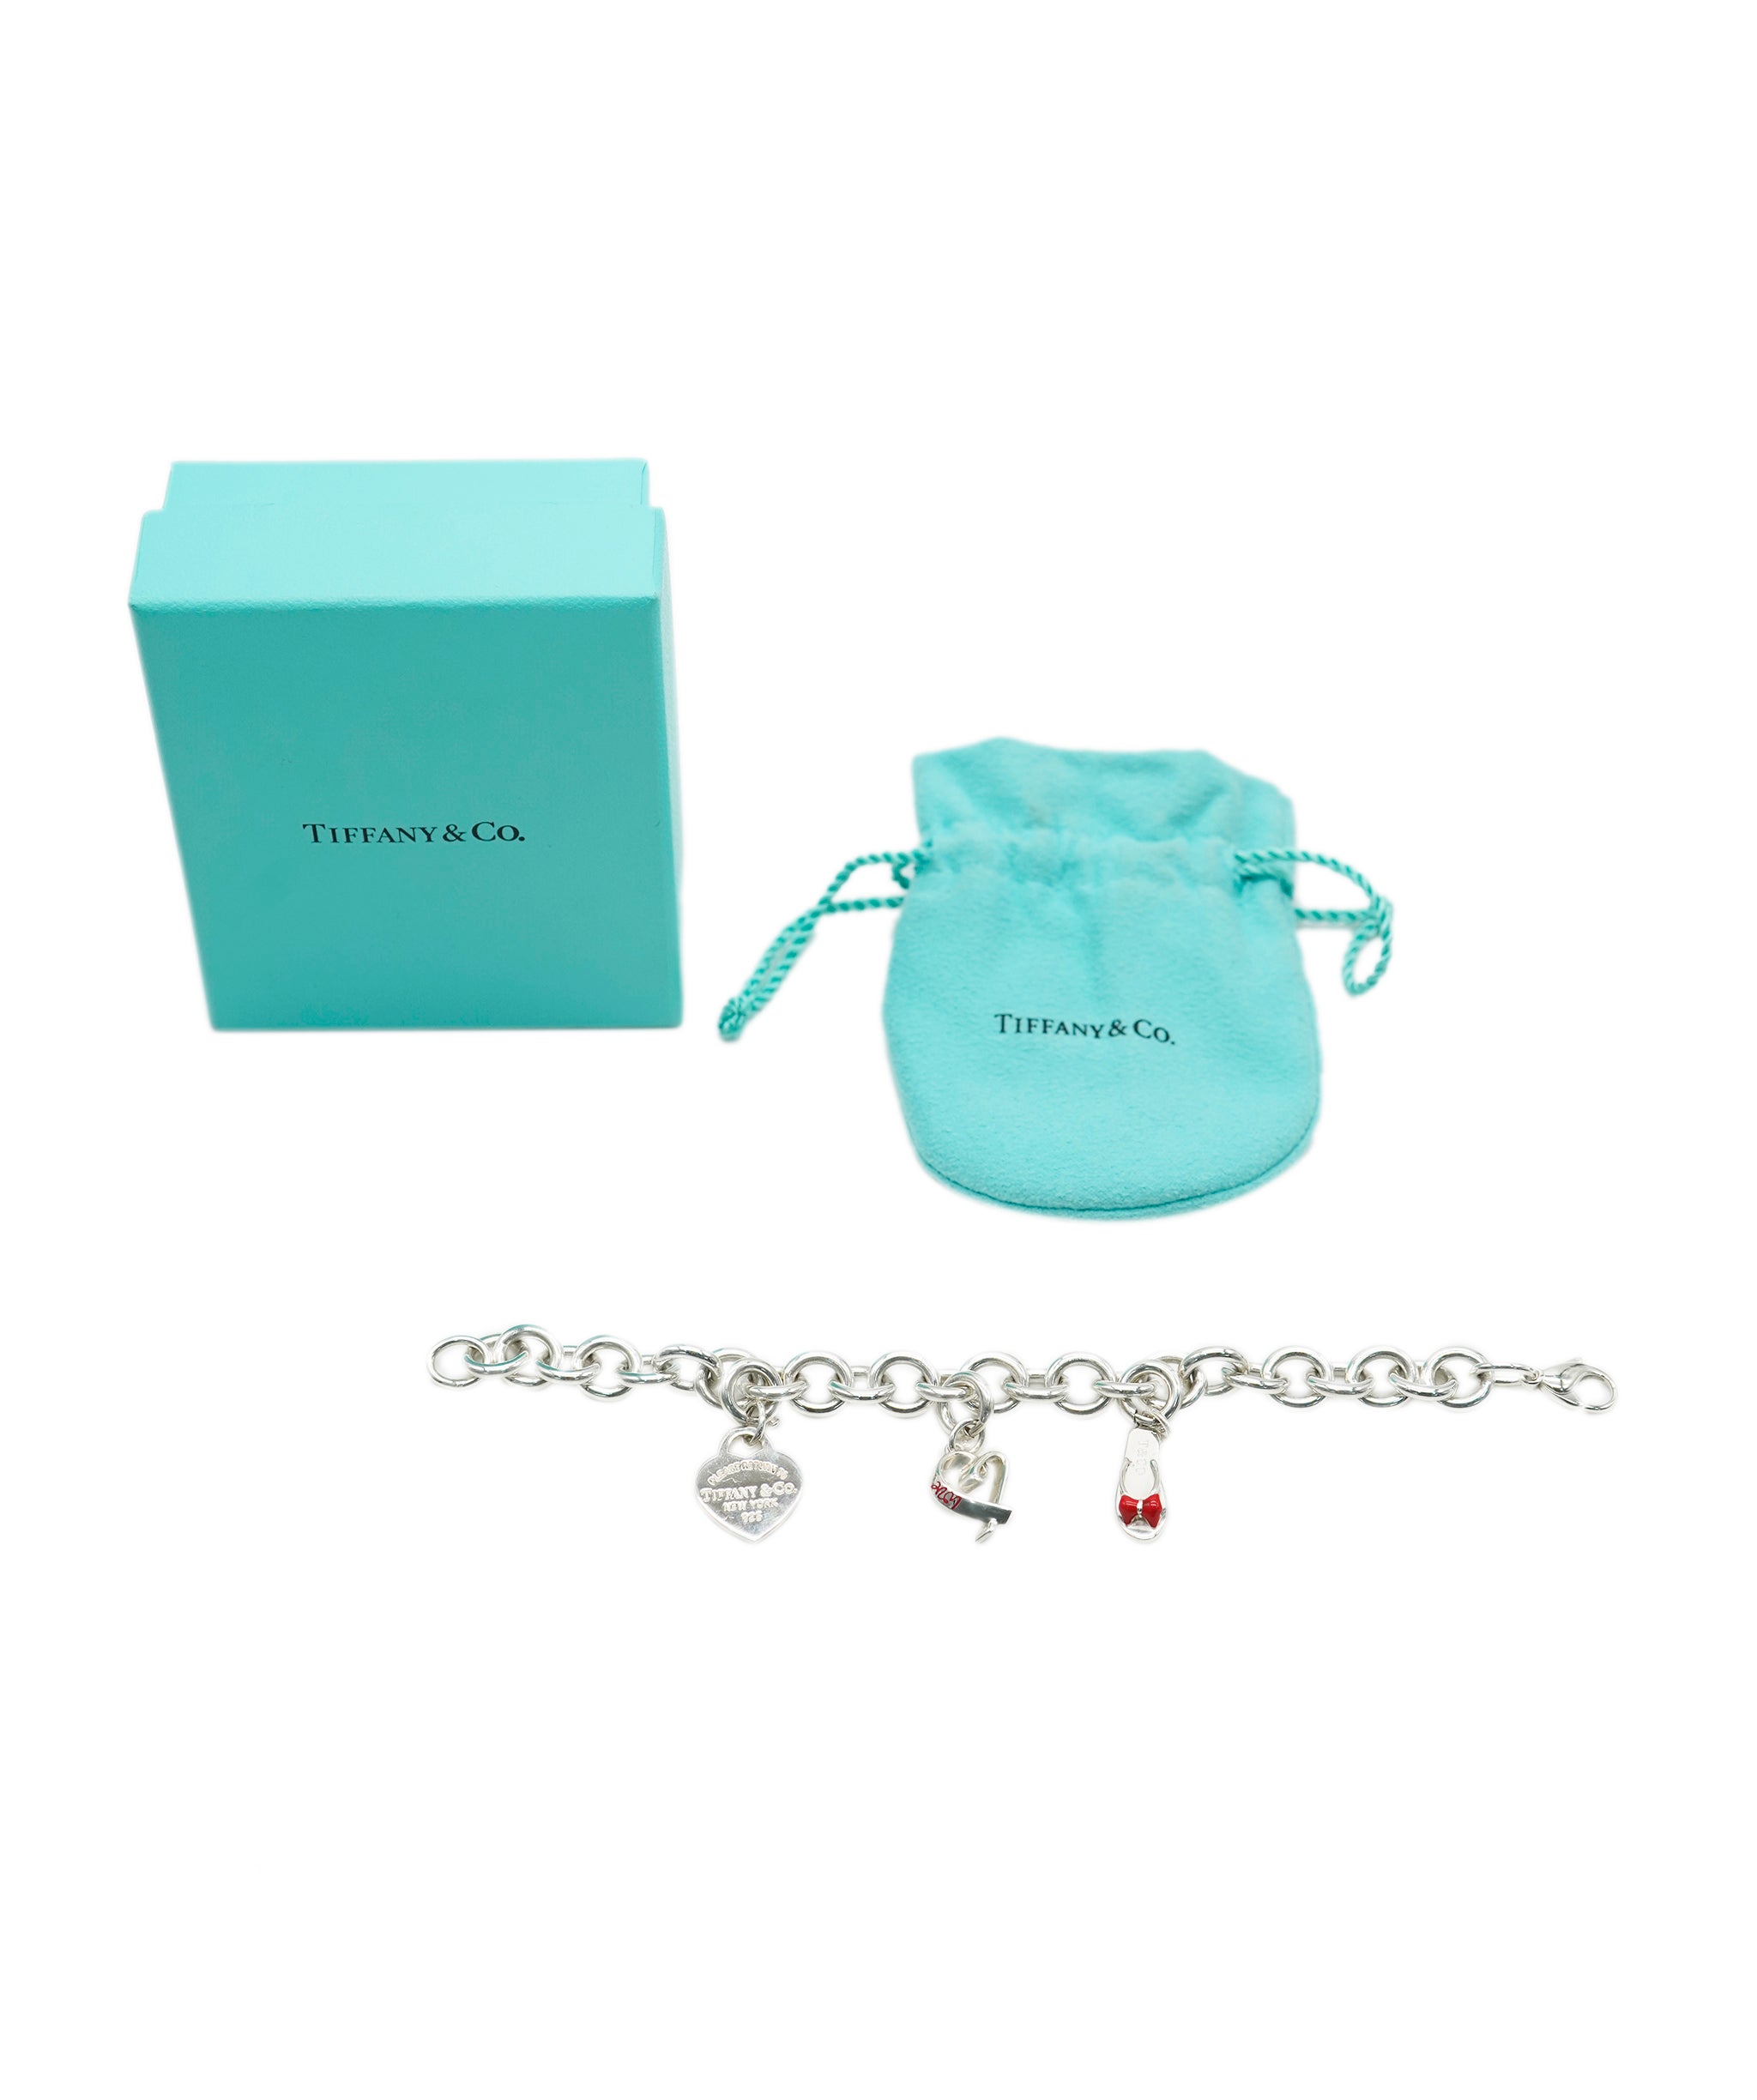 Tiffany & Co. Sterling Silver Charm Bracelet With 3 Charms ABC0575